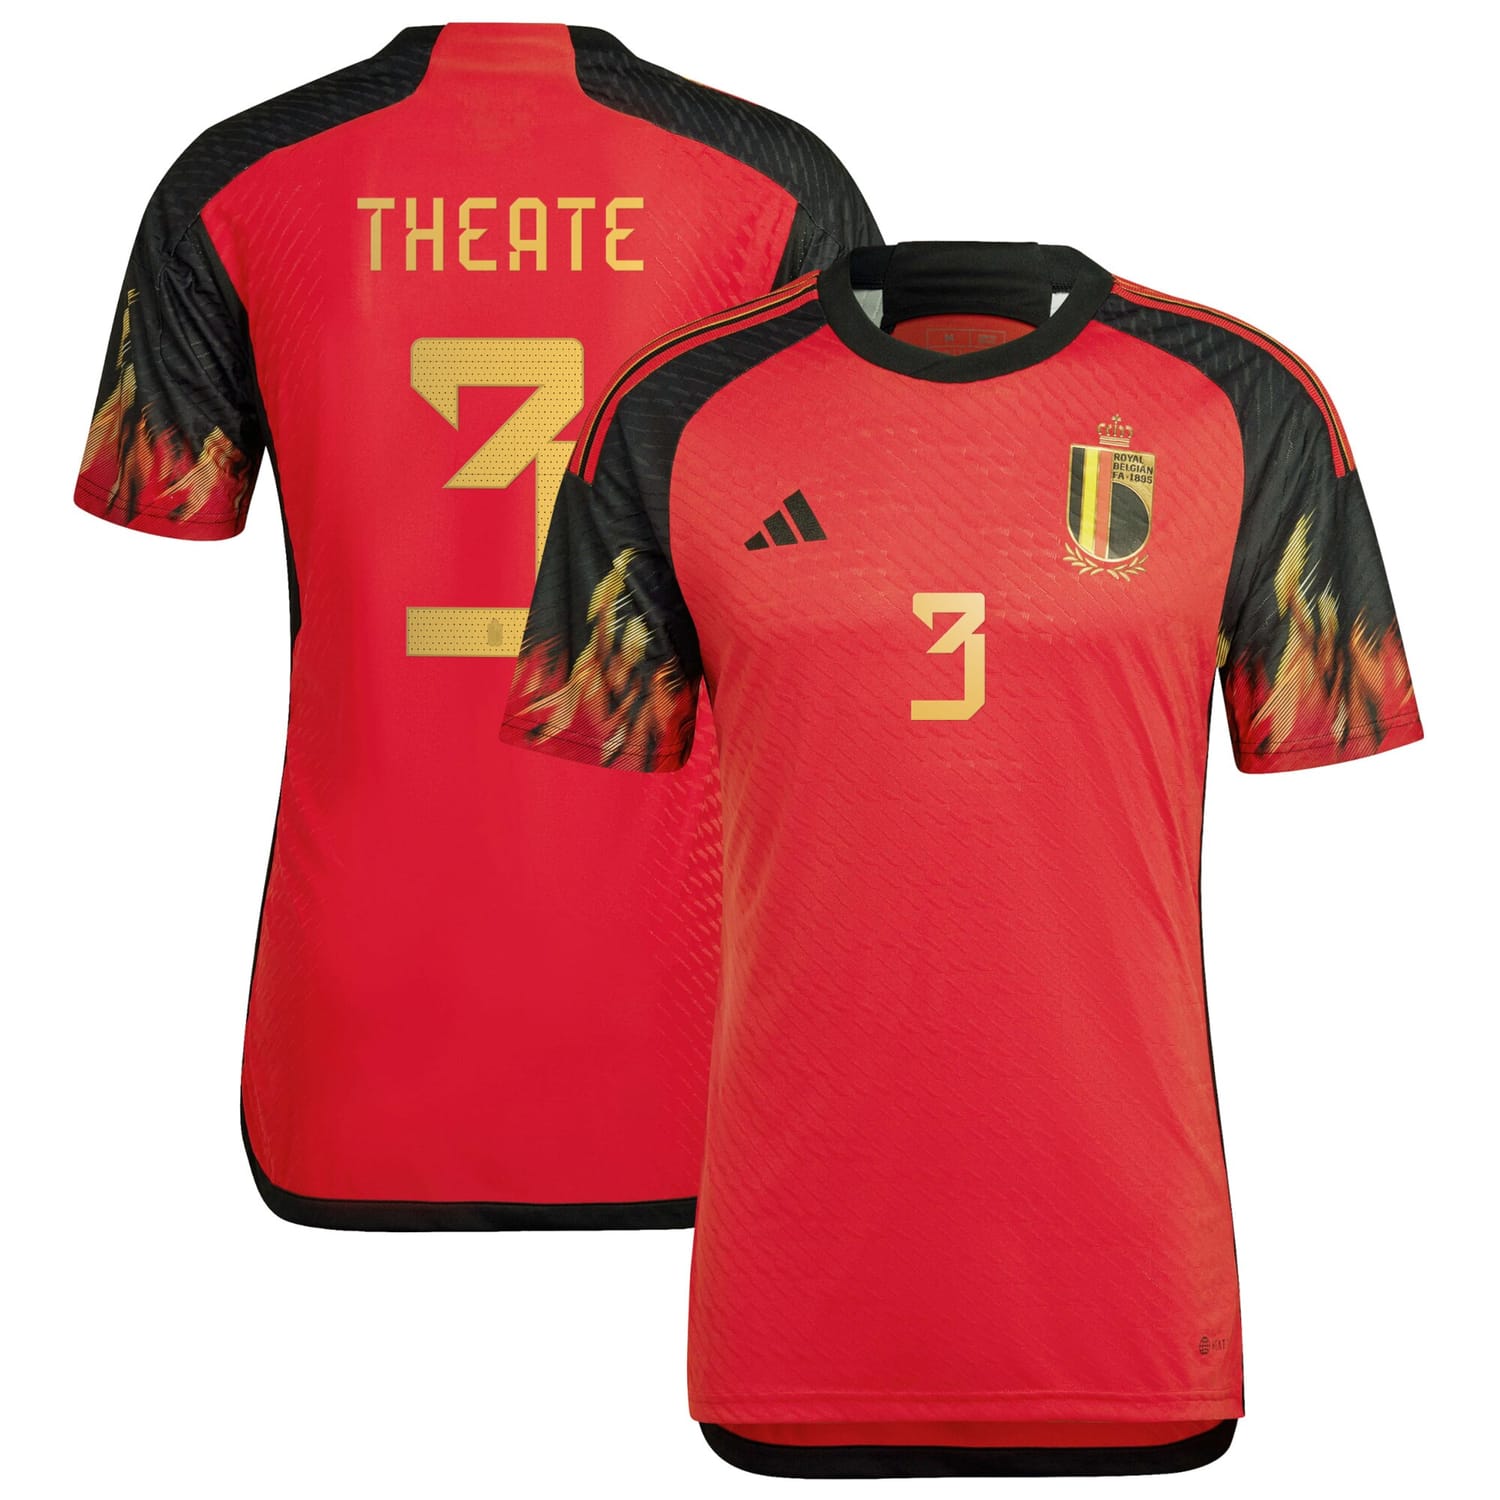 Belgium National Team Home Authentic Jersey Shirt 2022 player Arthur Theate 3 printing for Men